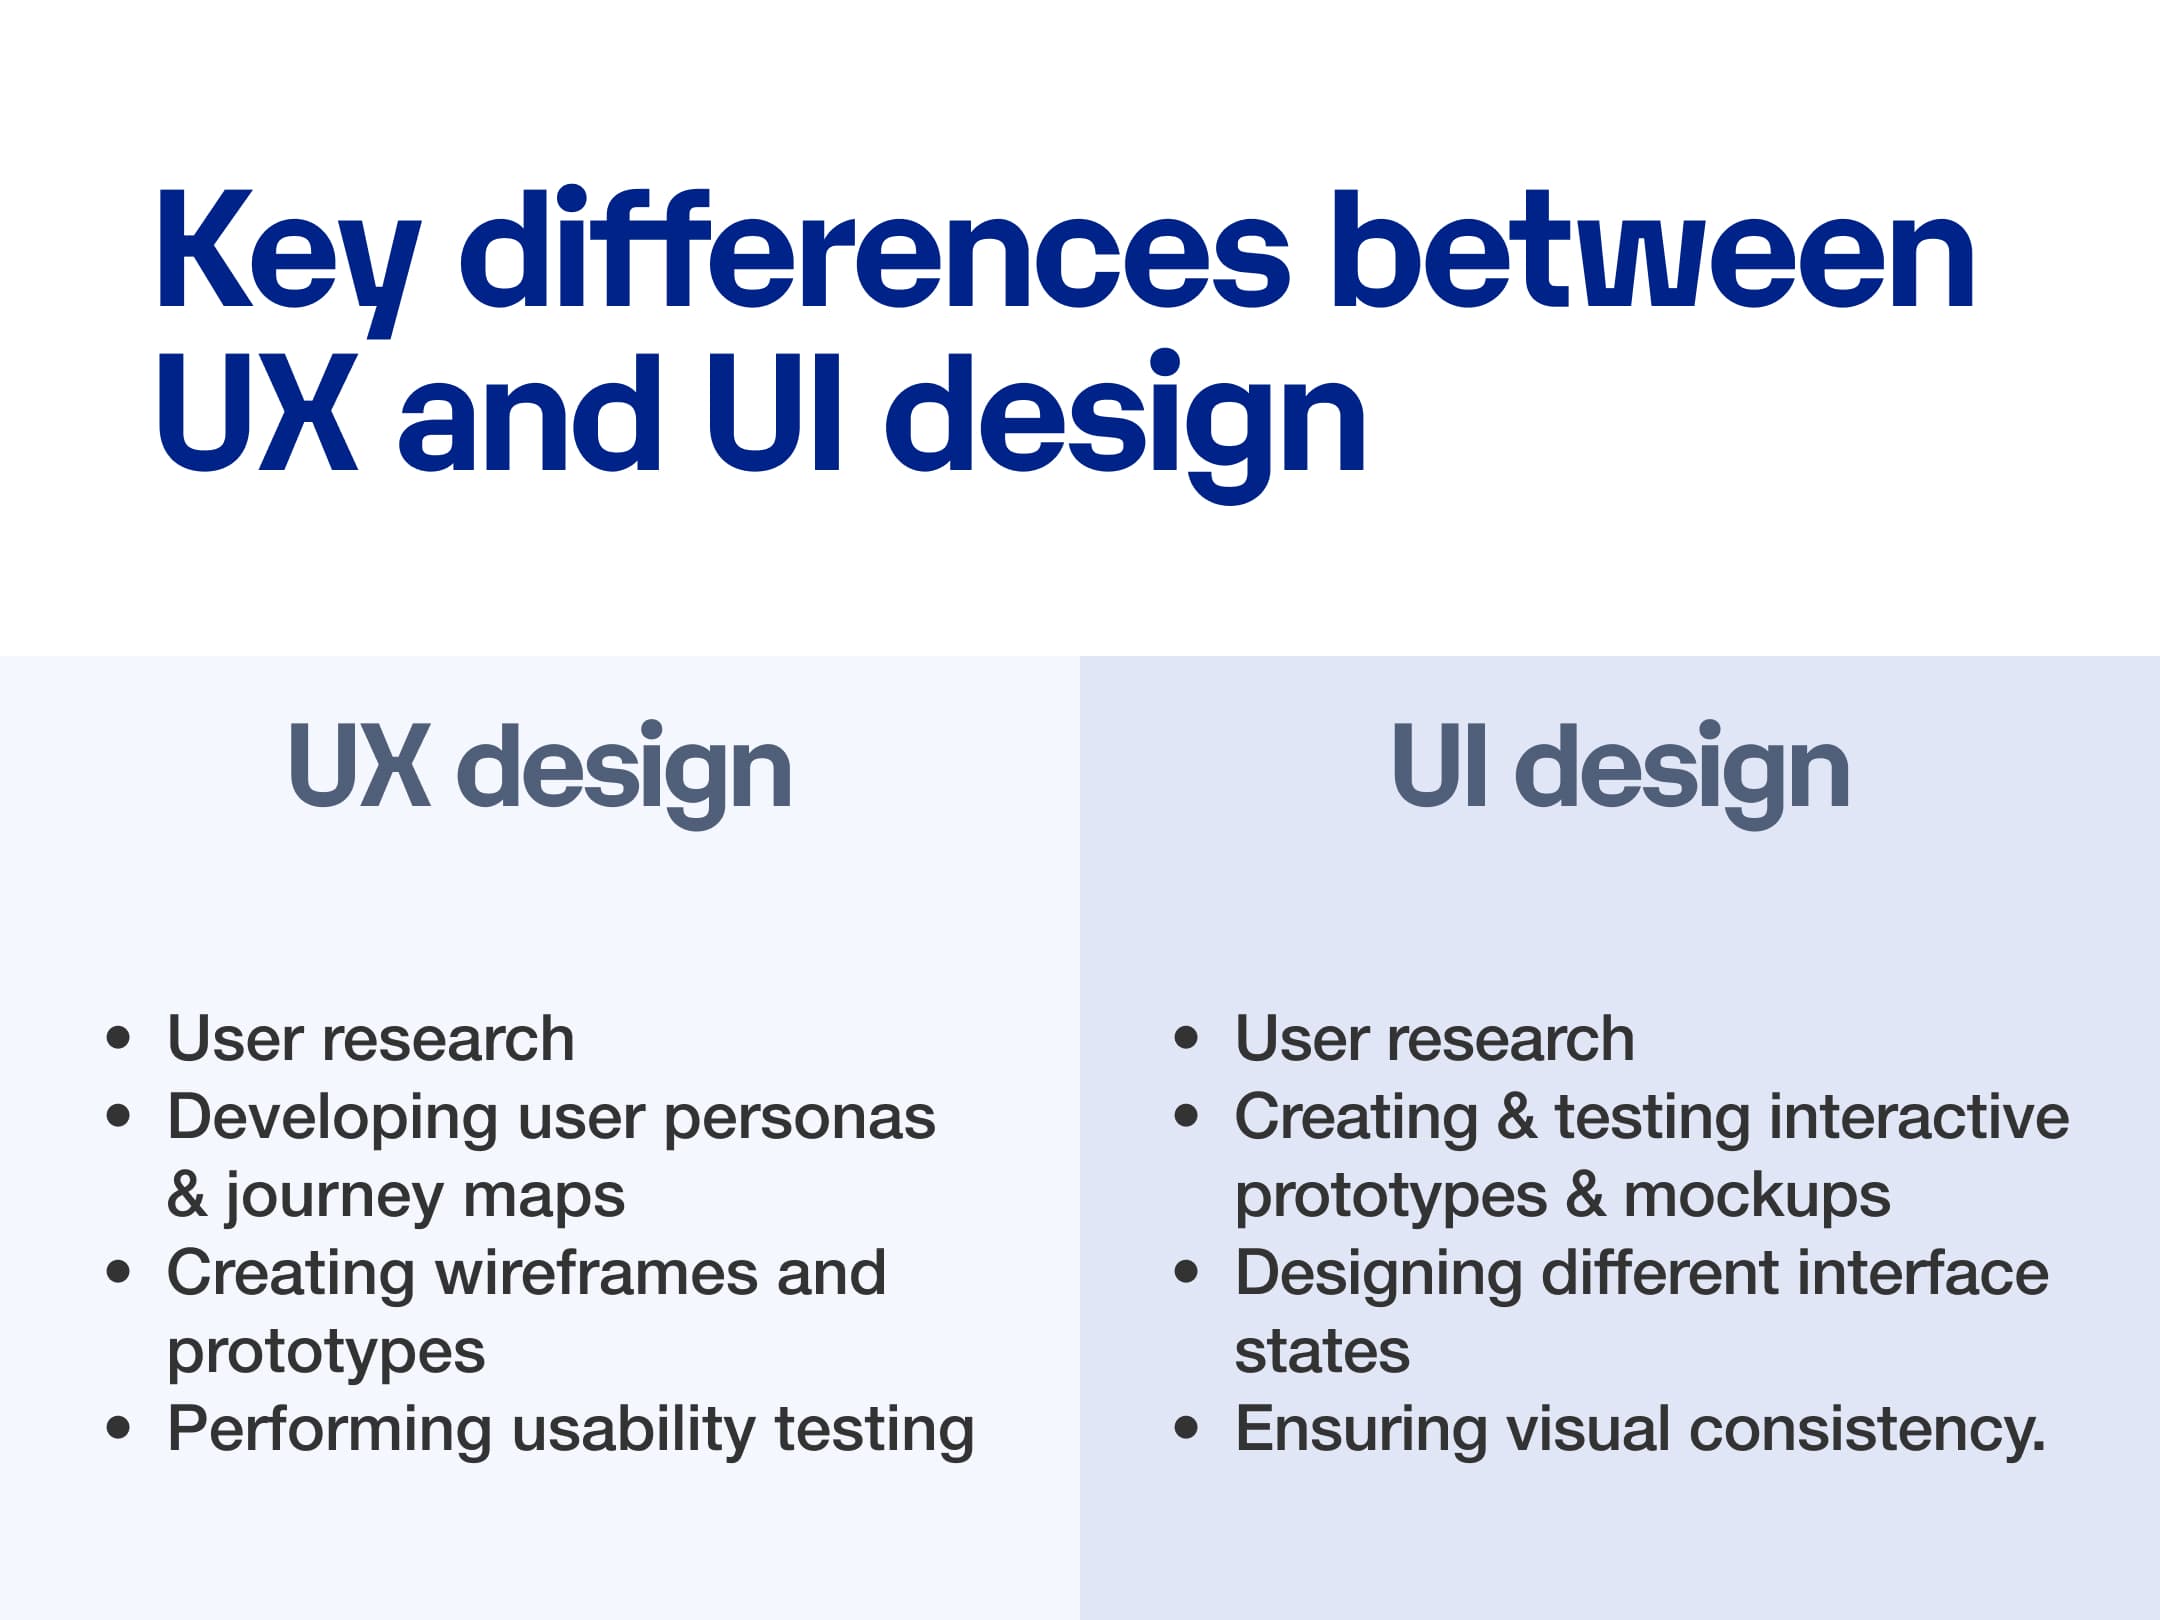 The Key Differences Between UX and UI Design